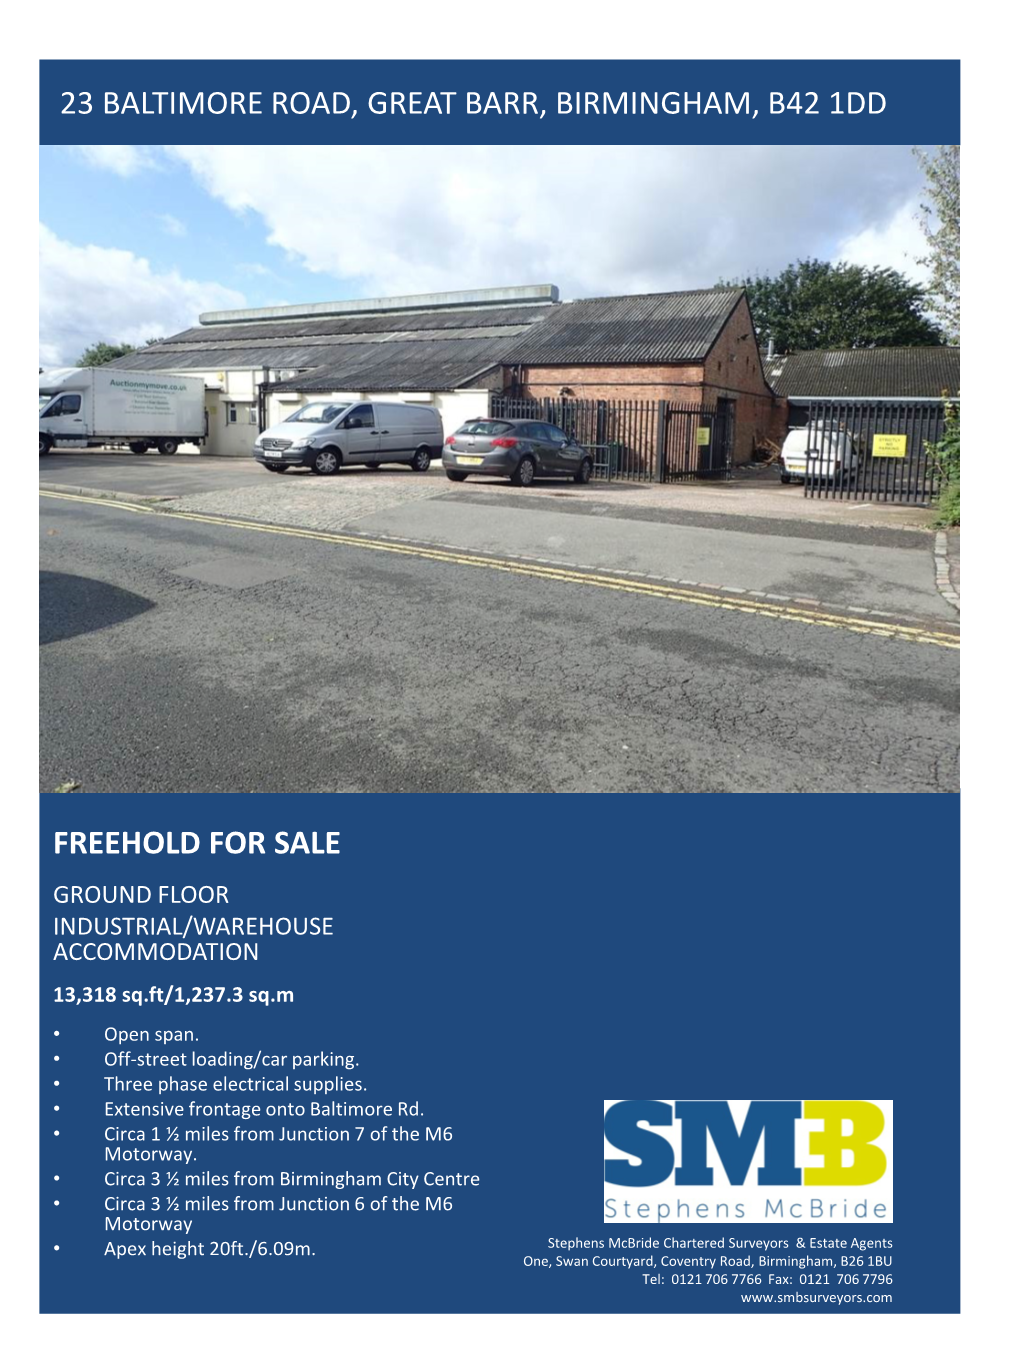 23 Baltimore Road, Great Barr, Birmingham, B42 1Dd Freehold for Sale